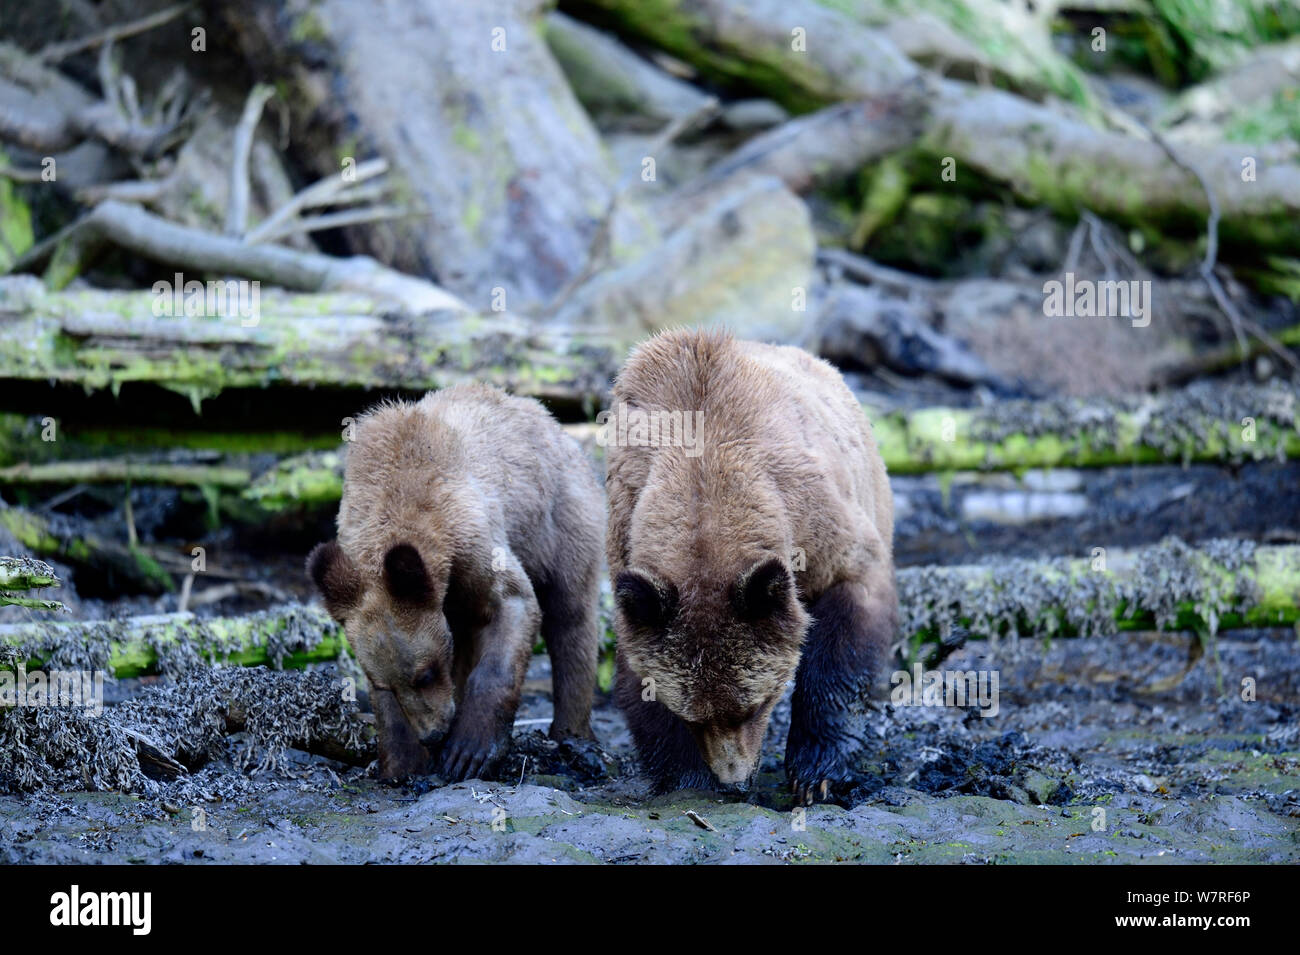 Female Grizzly bear (Ursus arctos horribilis) and her cub foraging for clams at low tide on the banks of the inlet, Khutzeymateen Grizzly Bear Sanctuary, British Columbia, Canada, June. Stock Photo